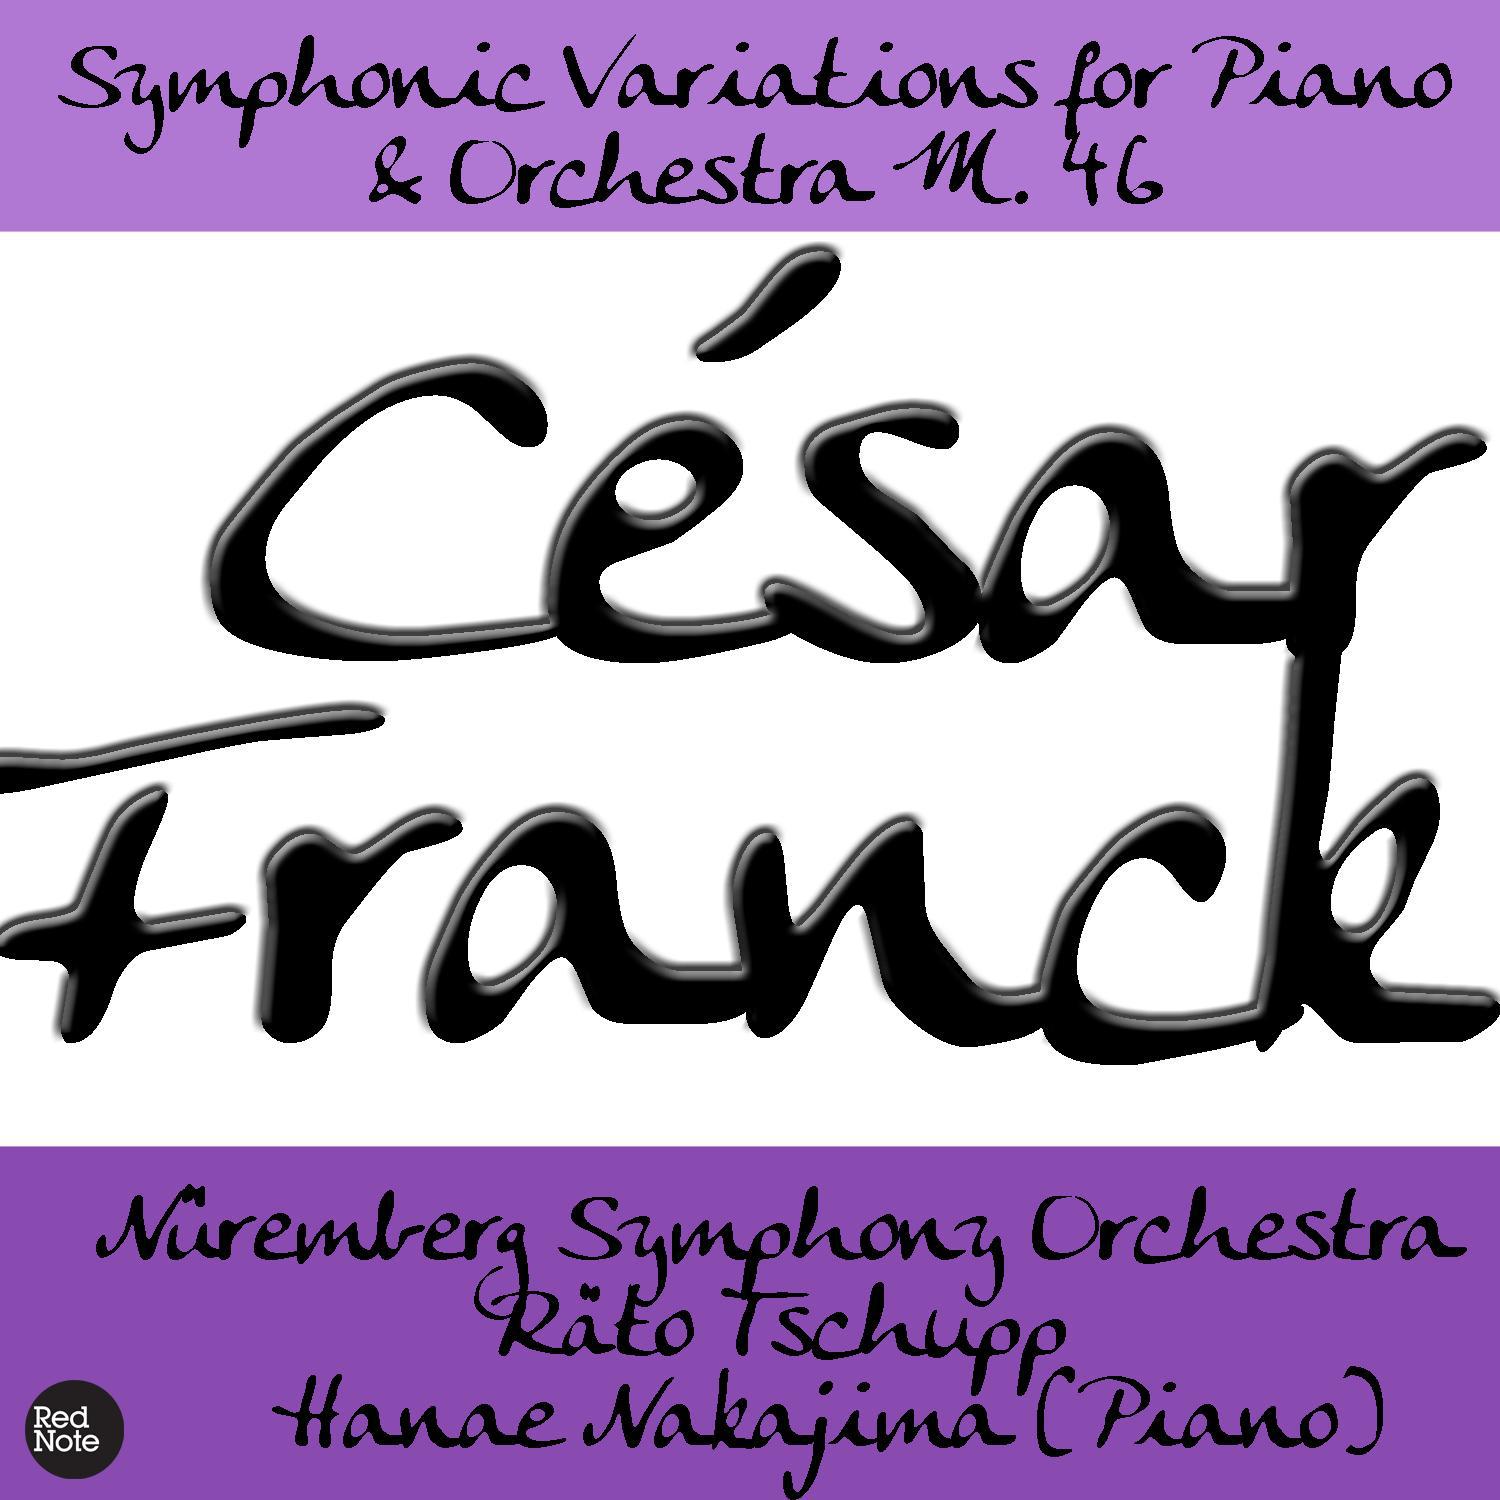 Franck: Symphonic Variations for Piano & Orchestra M. 46